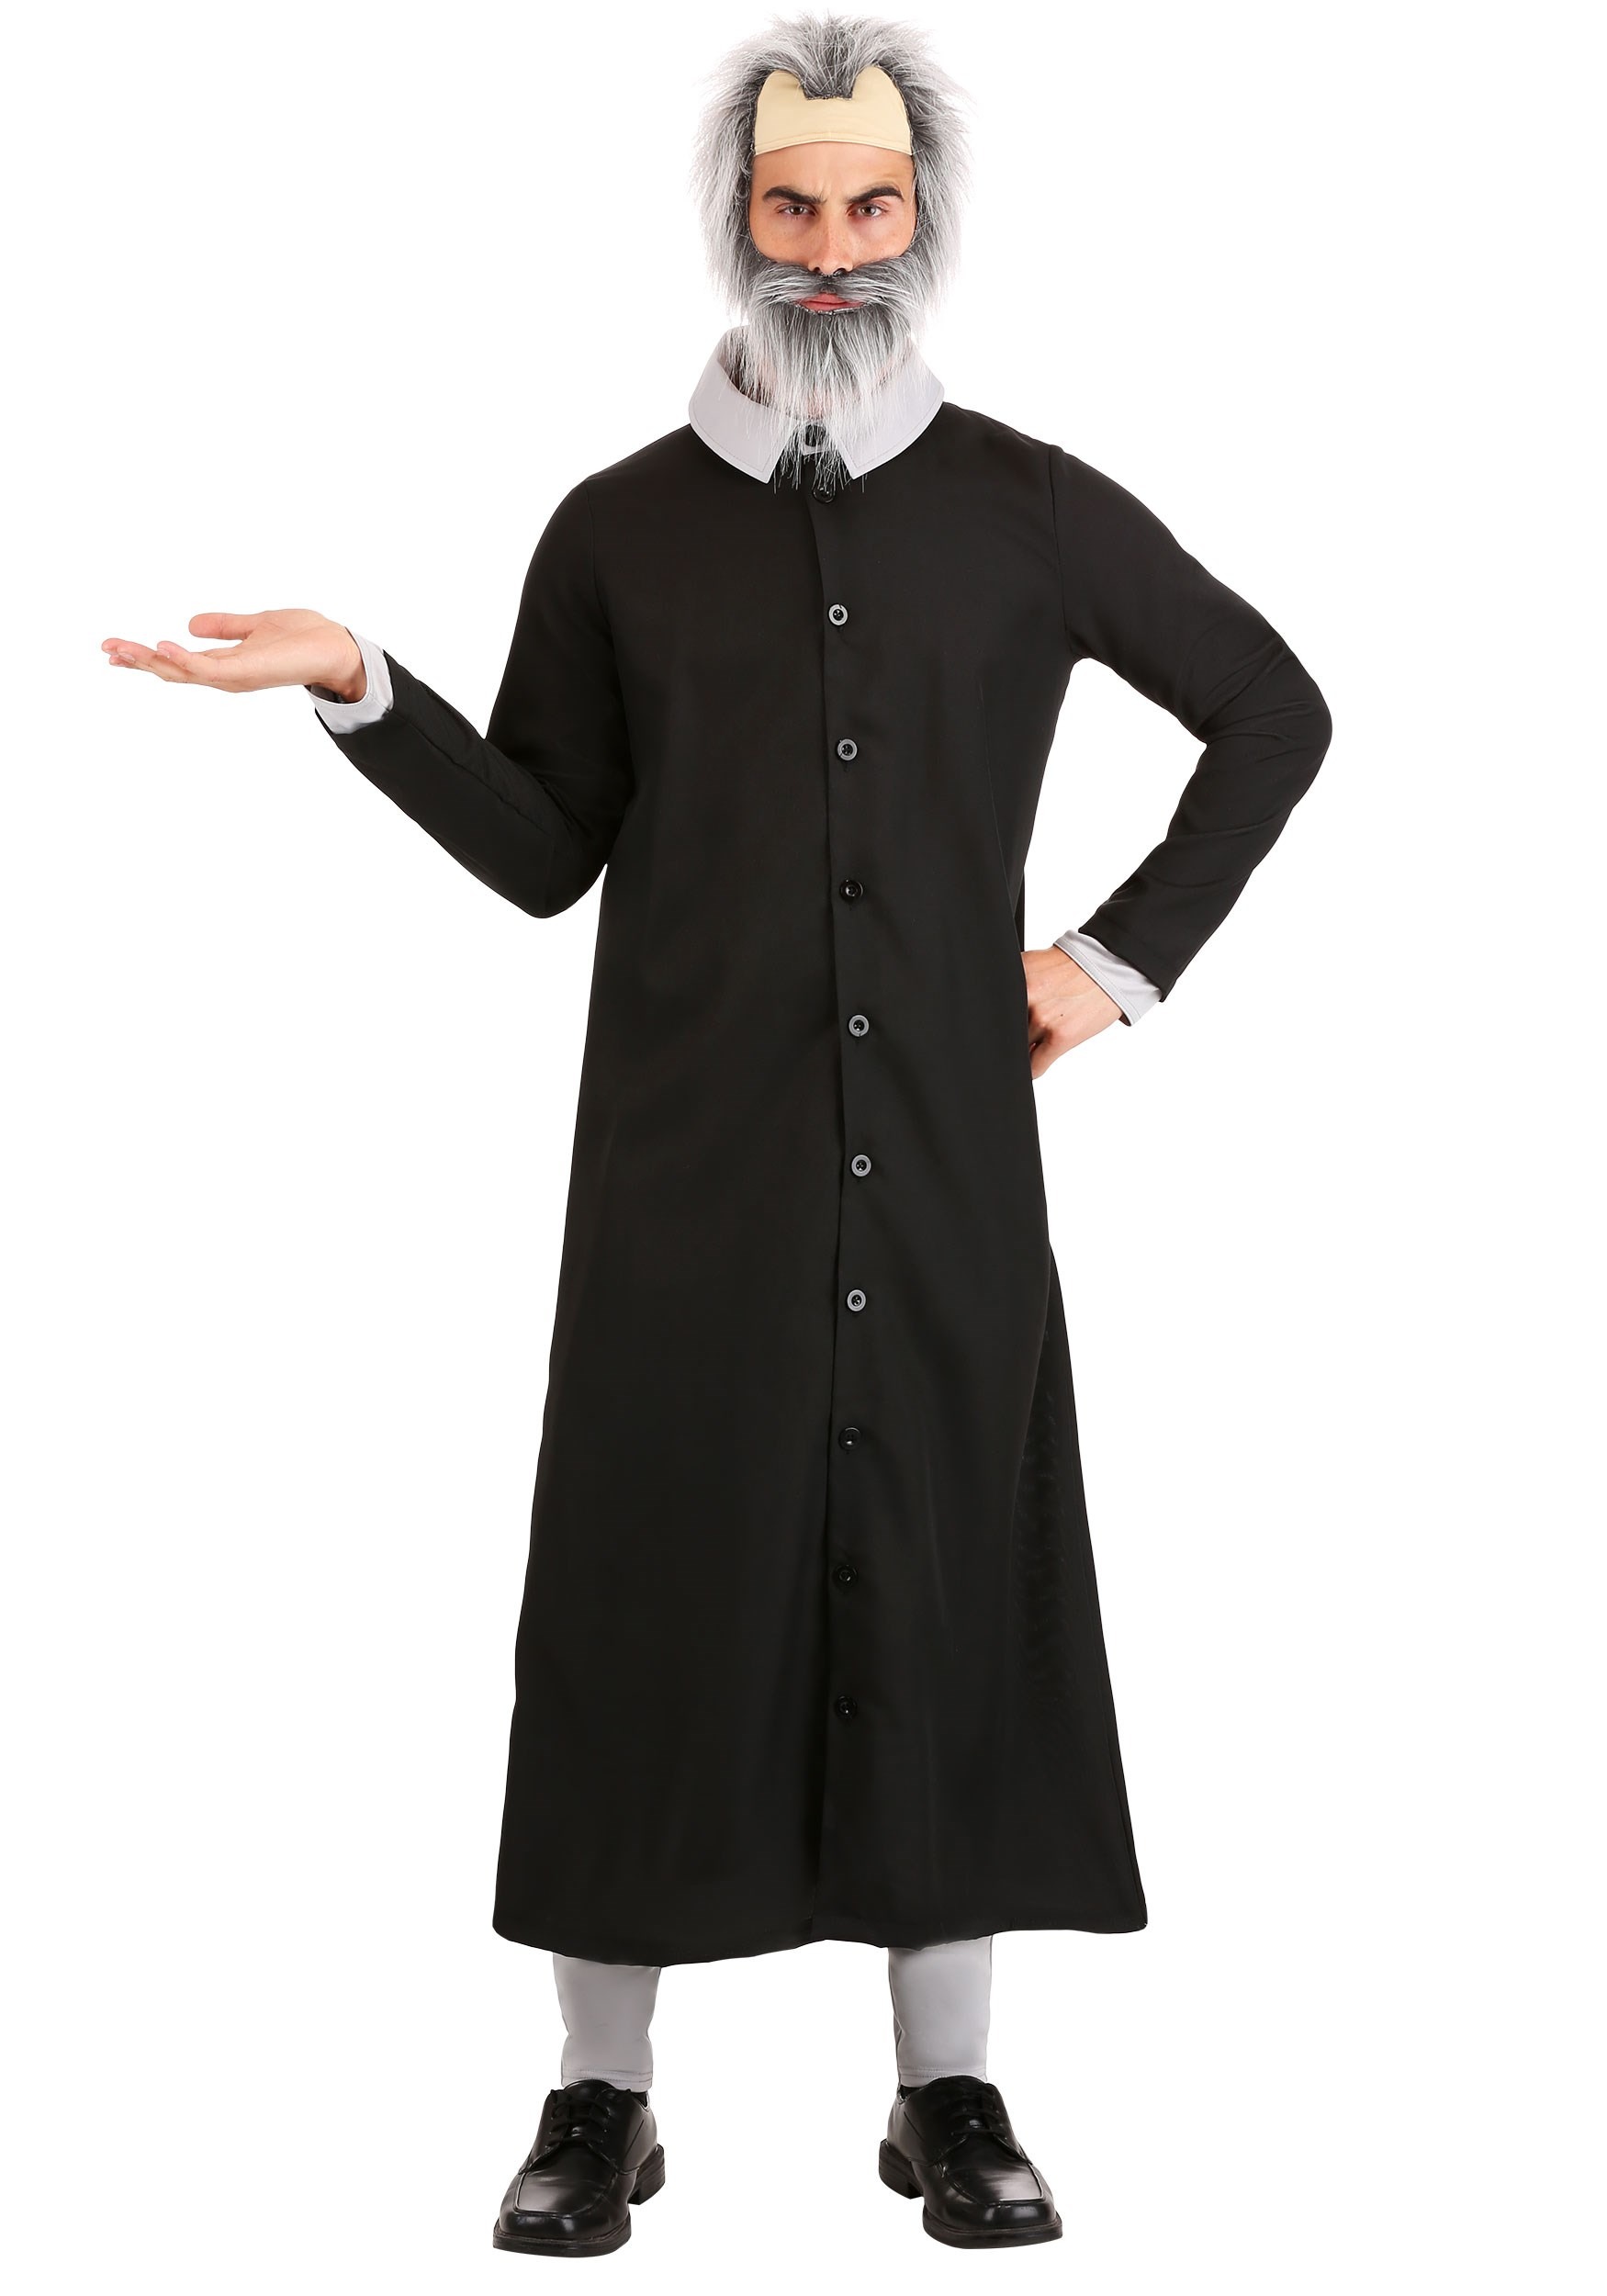 Photos - Fancy Dress Galileo FUN Costumes Adult  Galilei Costume with Wig | Historical Costumes 